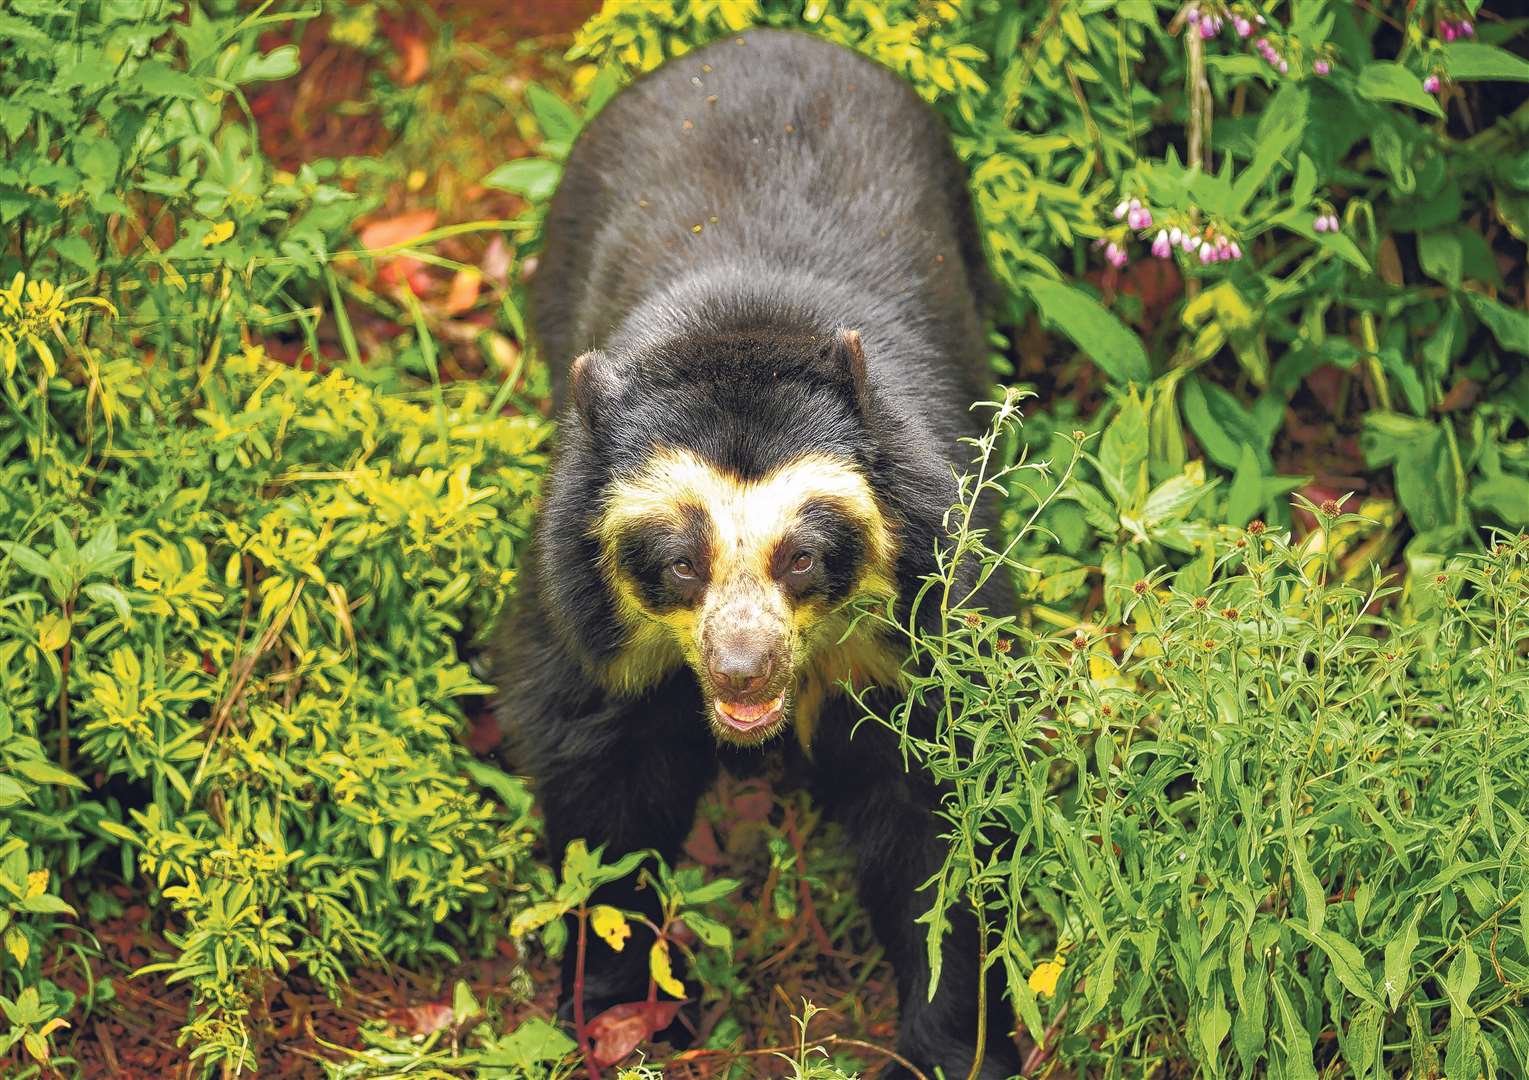 A spectacled bear of the type coming to Port Lympne